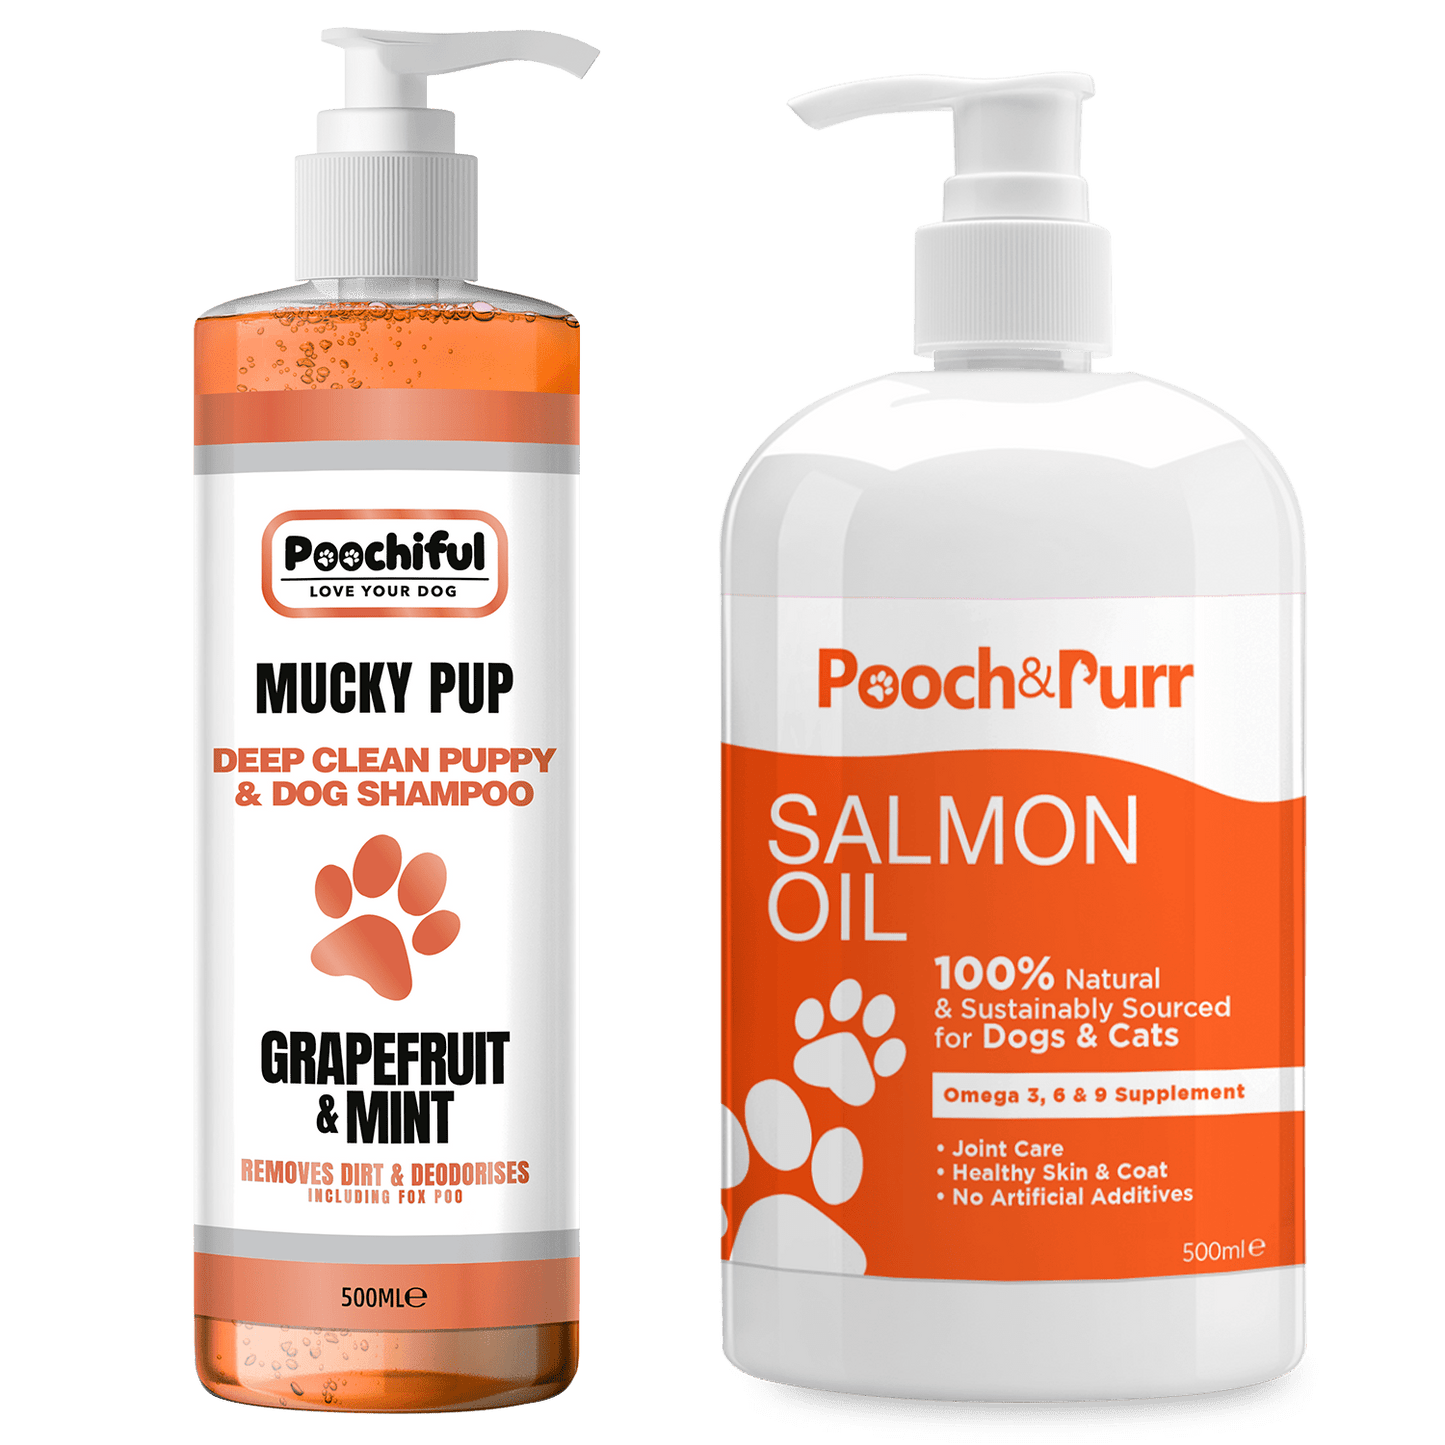 Mucky Pup 500ml + Pooch And Purr Salmon Oil 500ml Bundle